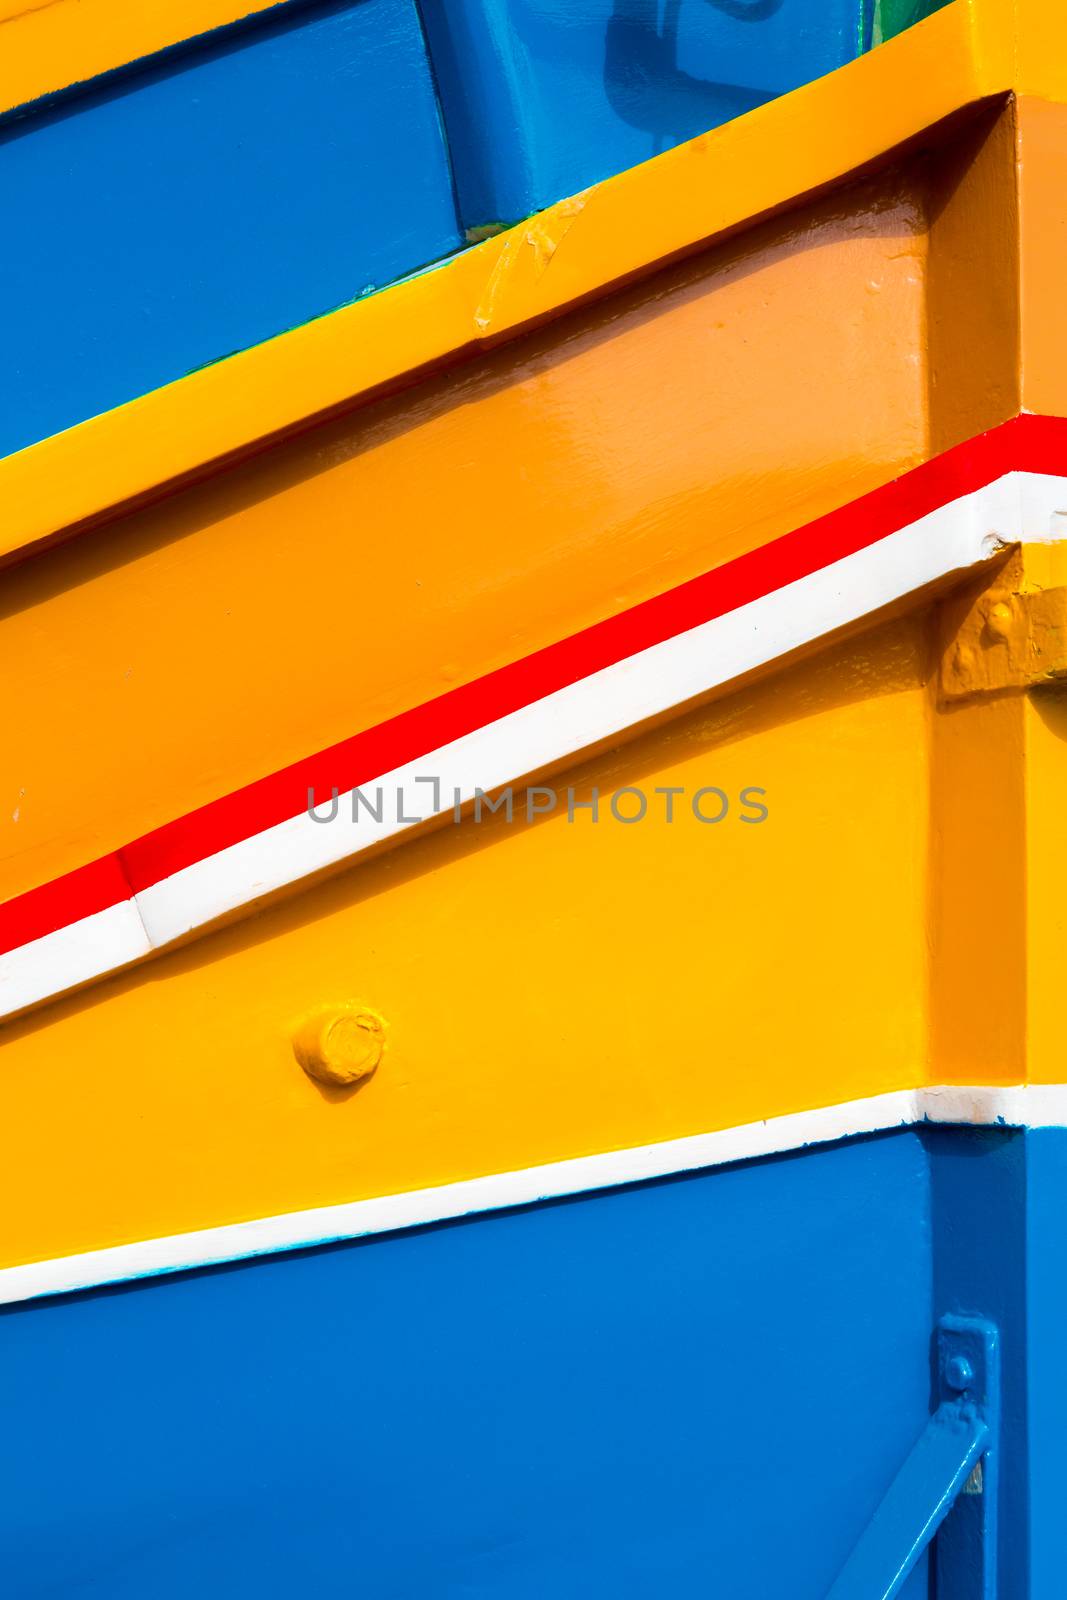 Abstract close up view of the vibrant colours and design usually used on the traditional Maltese fishing boat, the "Dghajsa" or "Luzzu".